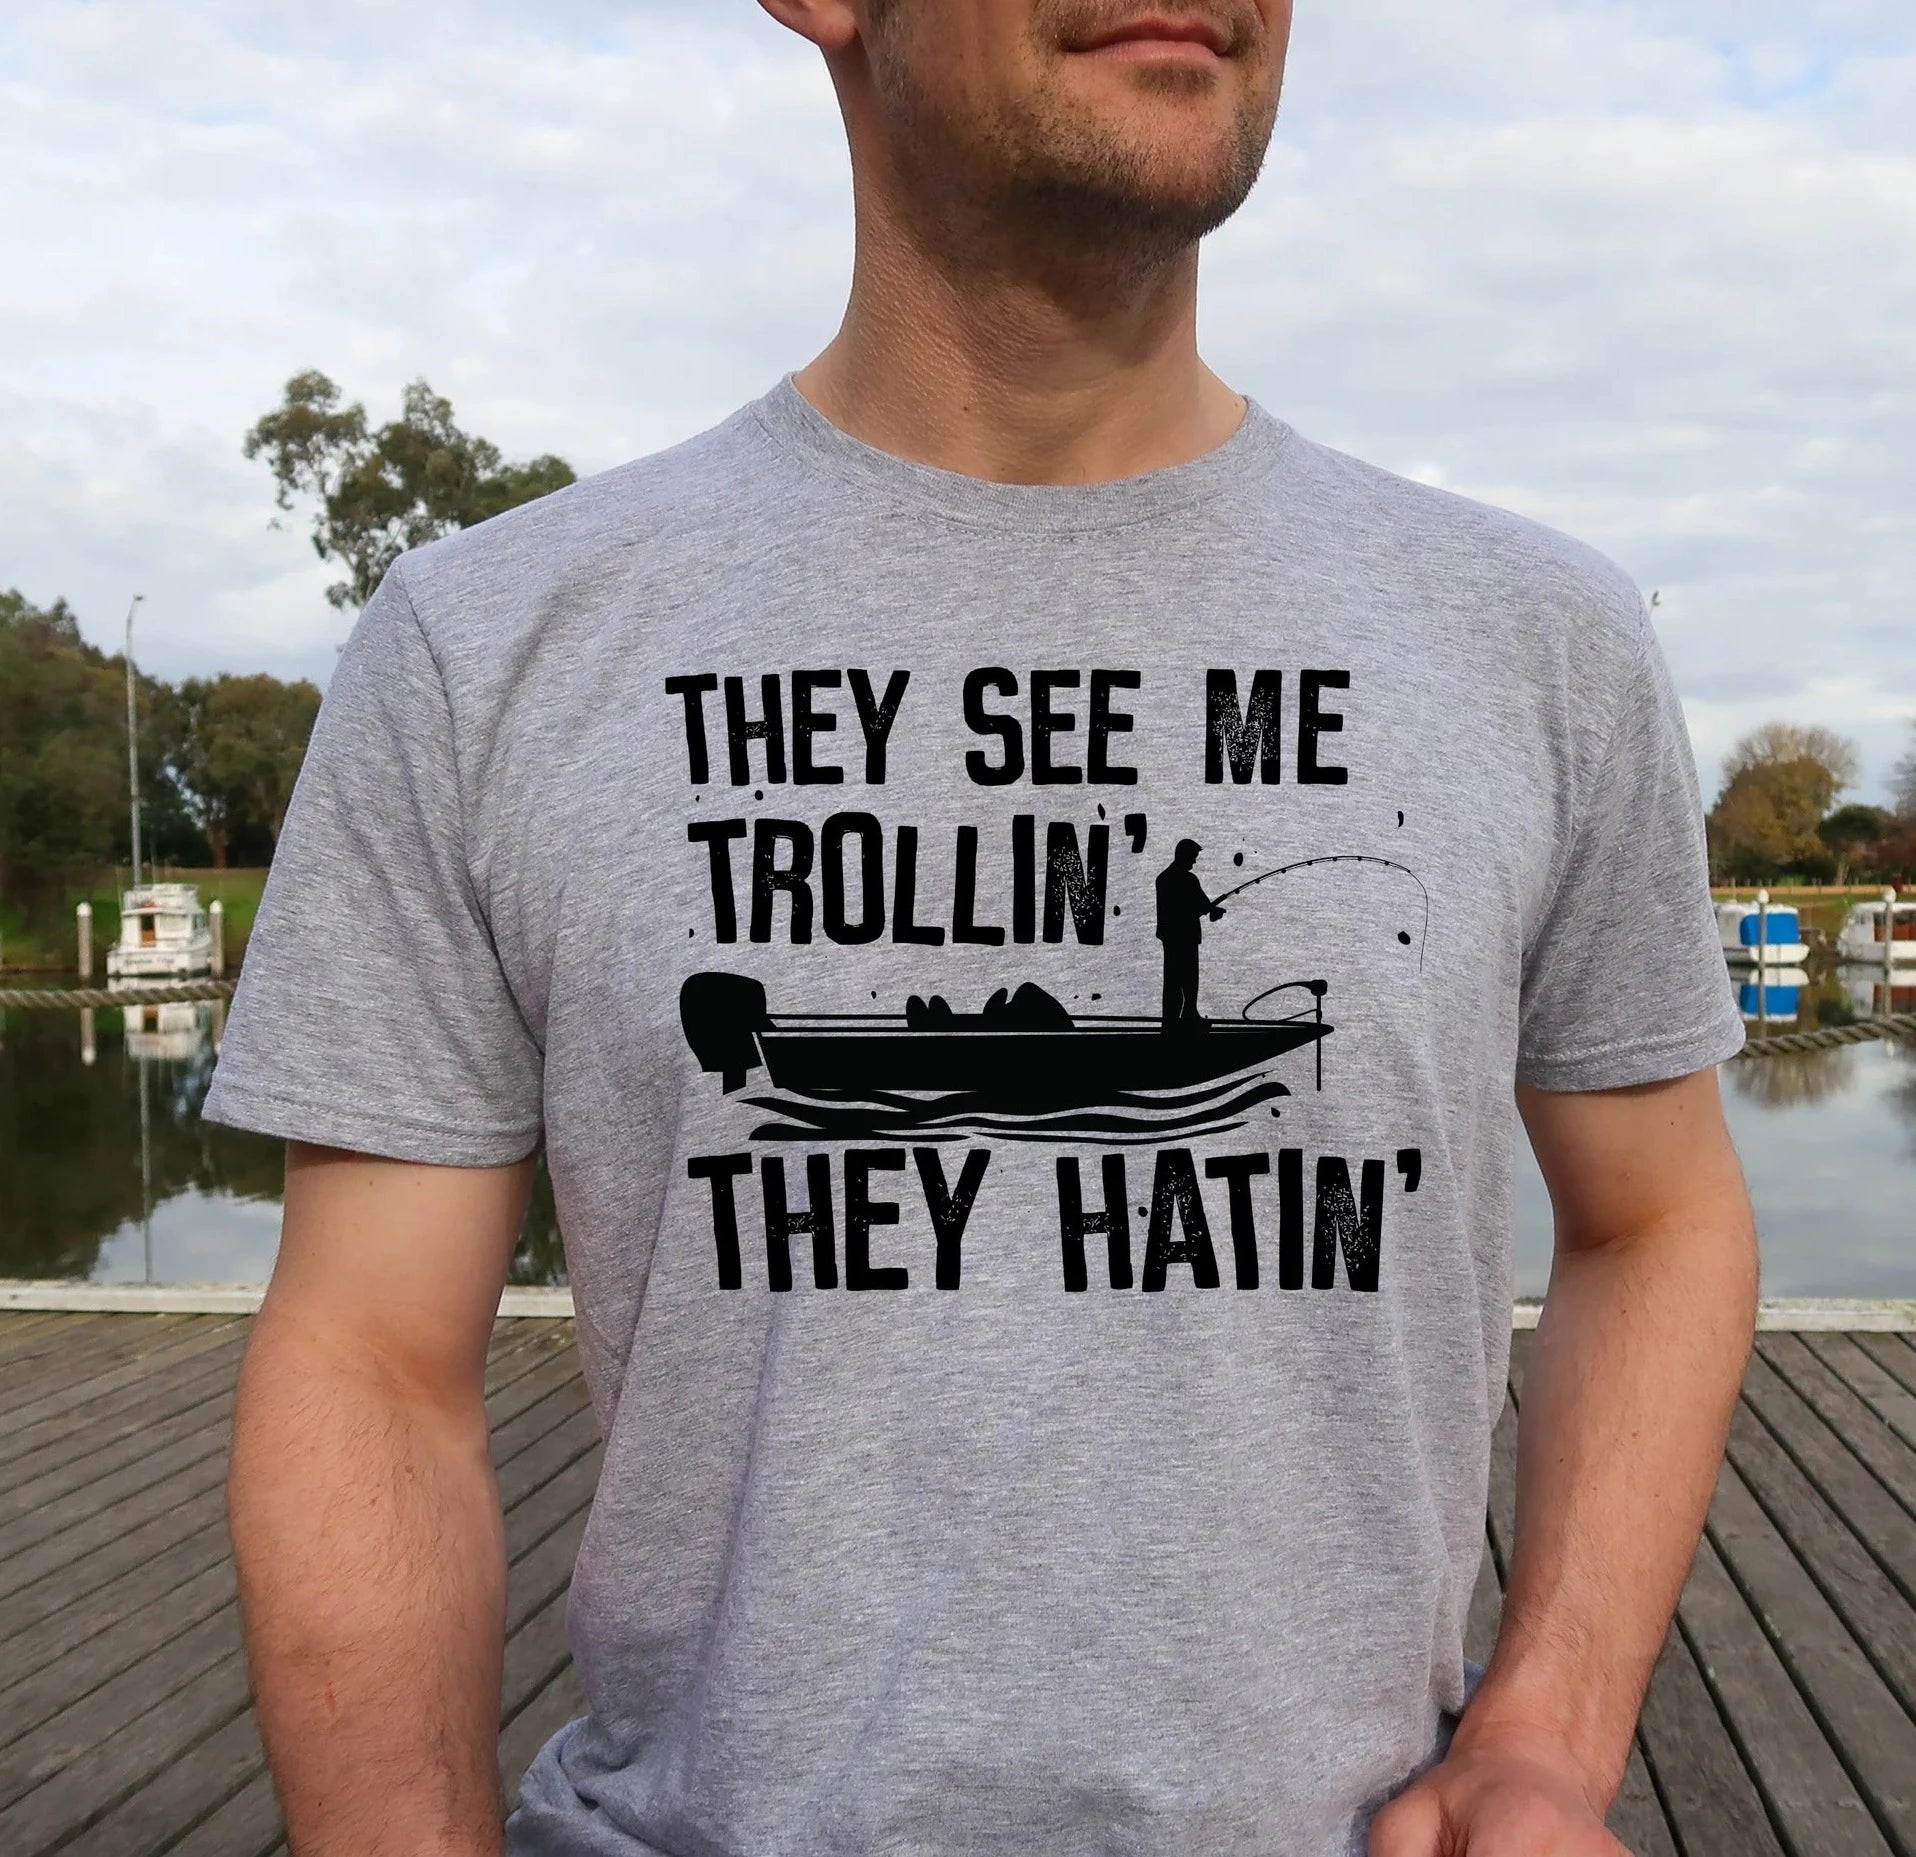 They See Me Trollin' Tee in Gray